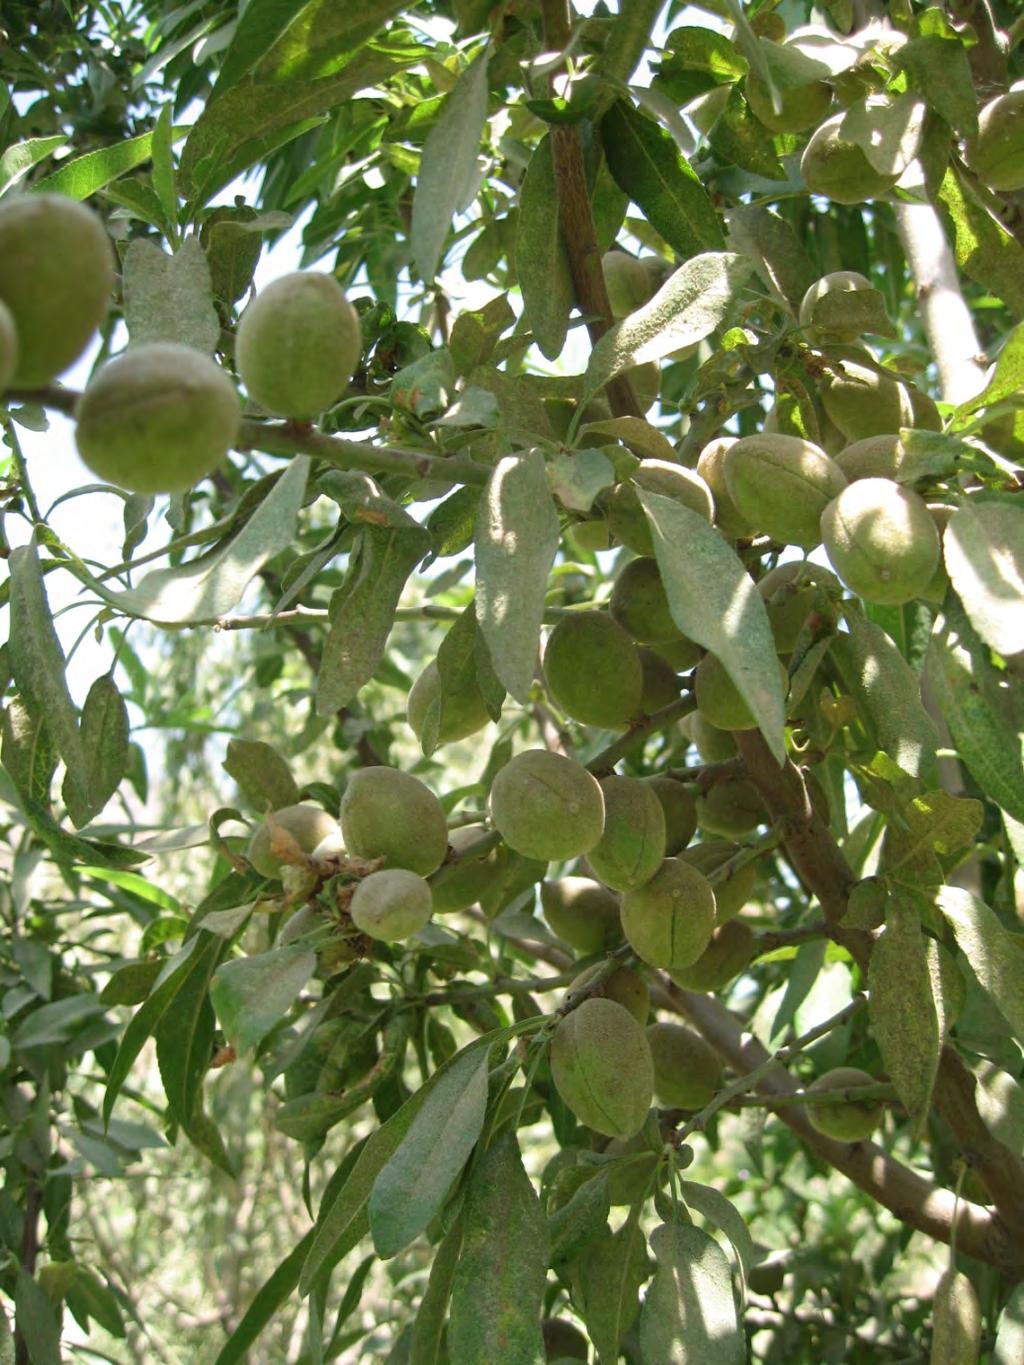 Different nut trees require different soils and grow best in elevated, welldrained areas.